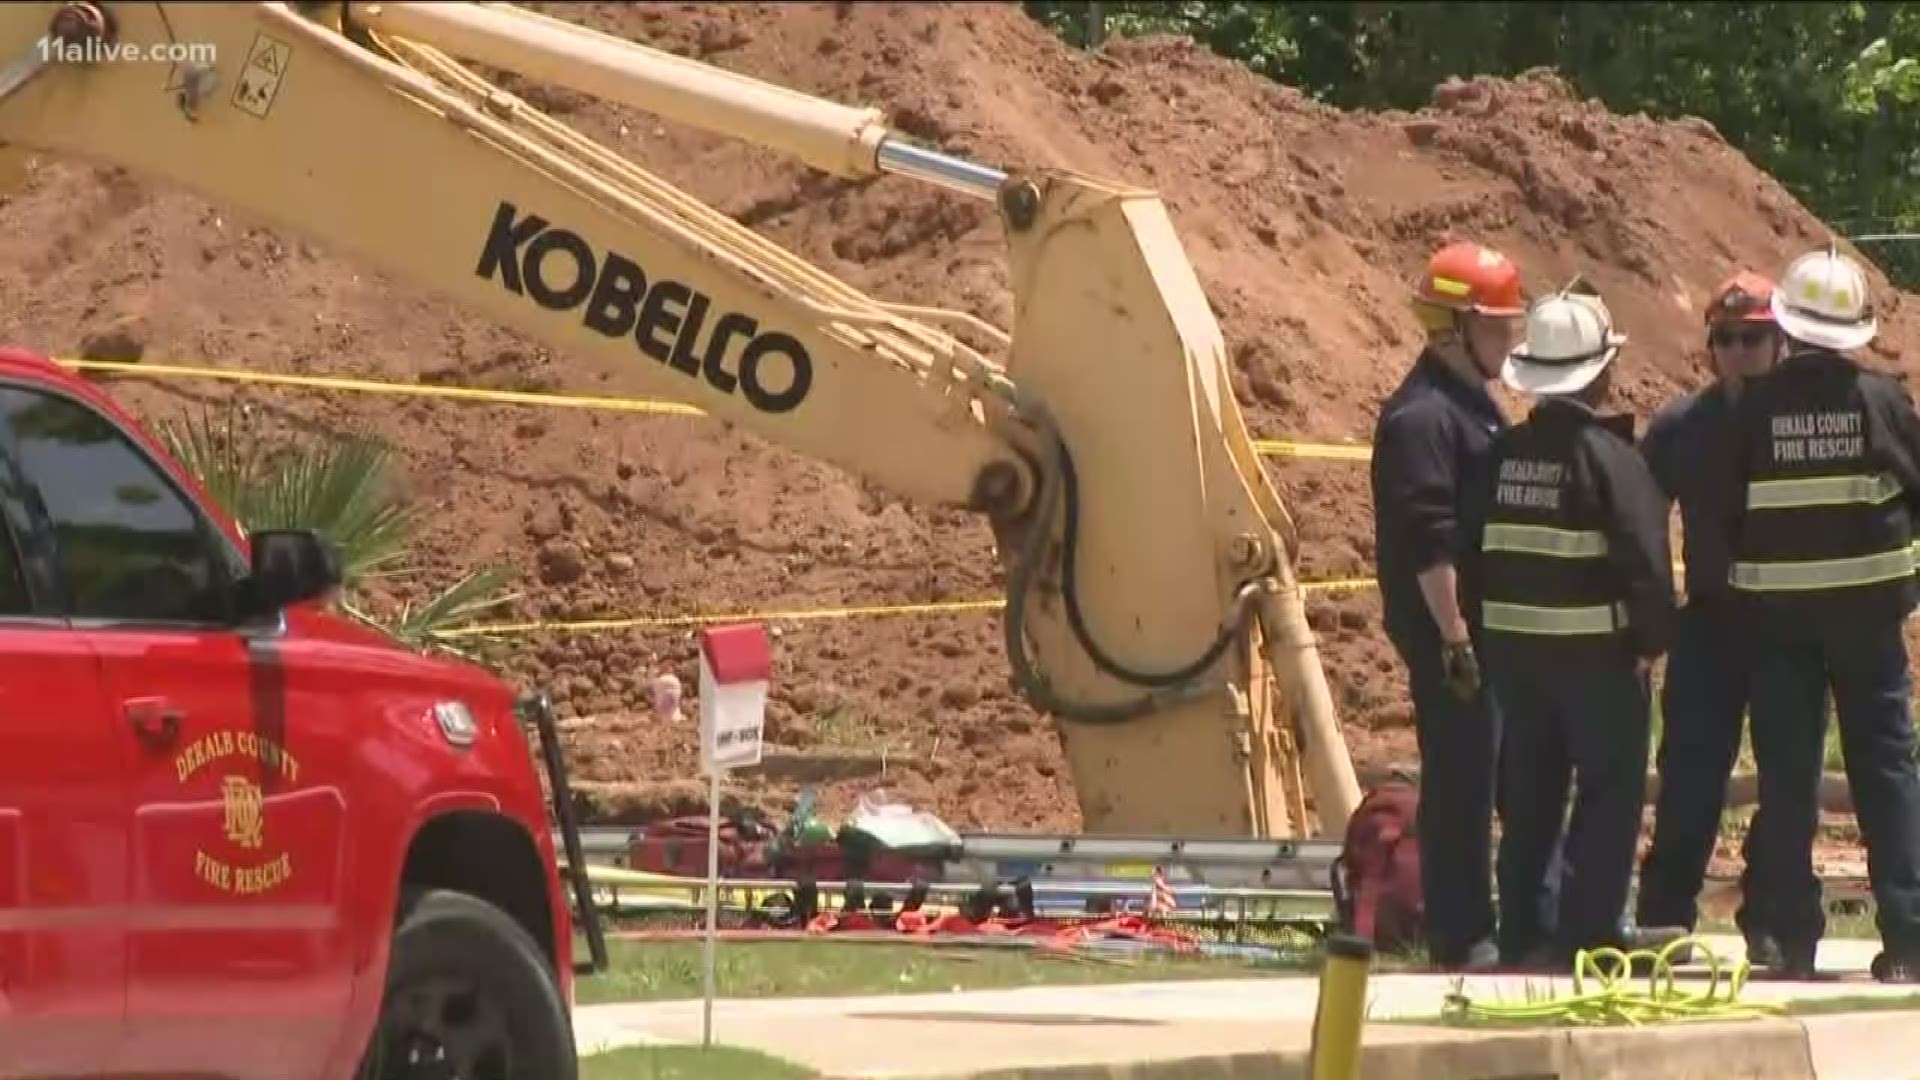 Despite attempts to save the worker from the 16-foot trench, he didn't survive.